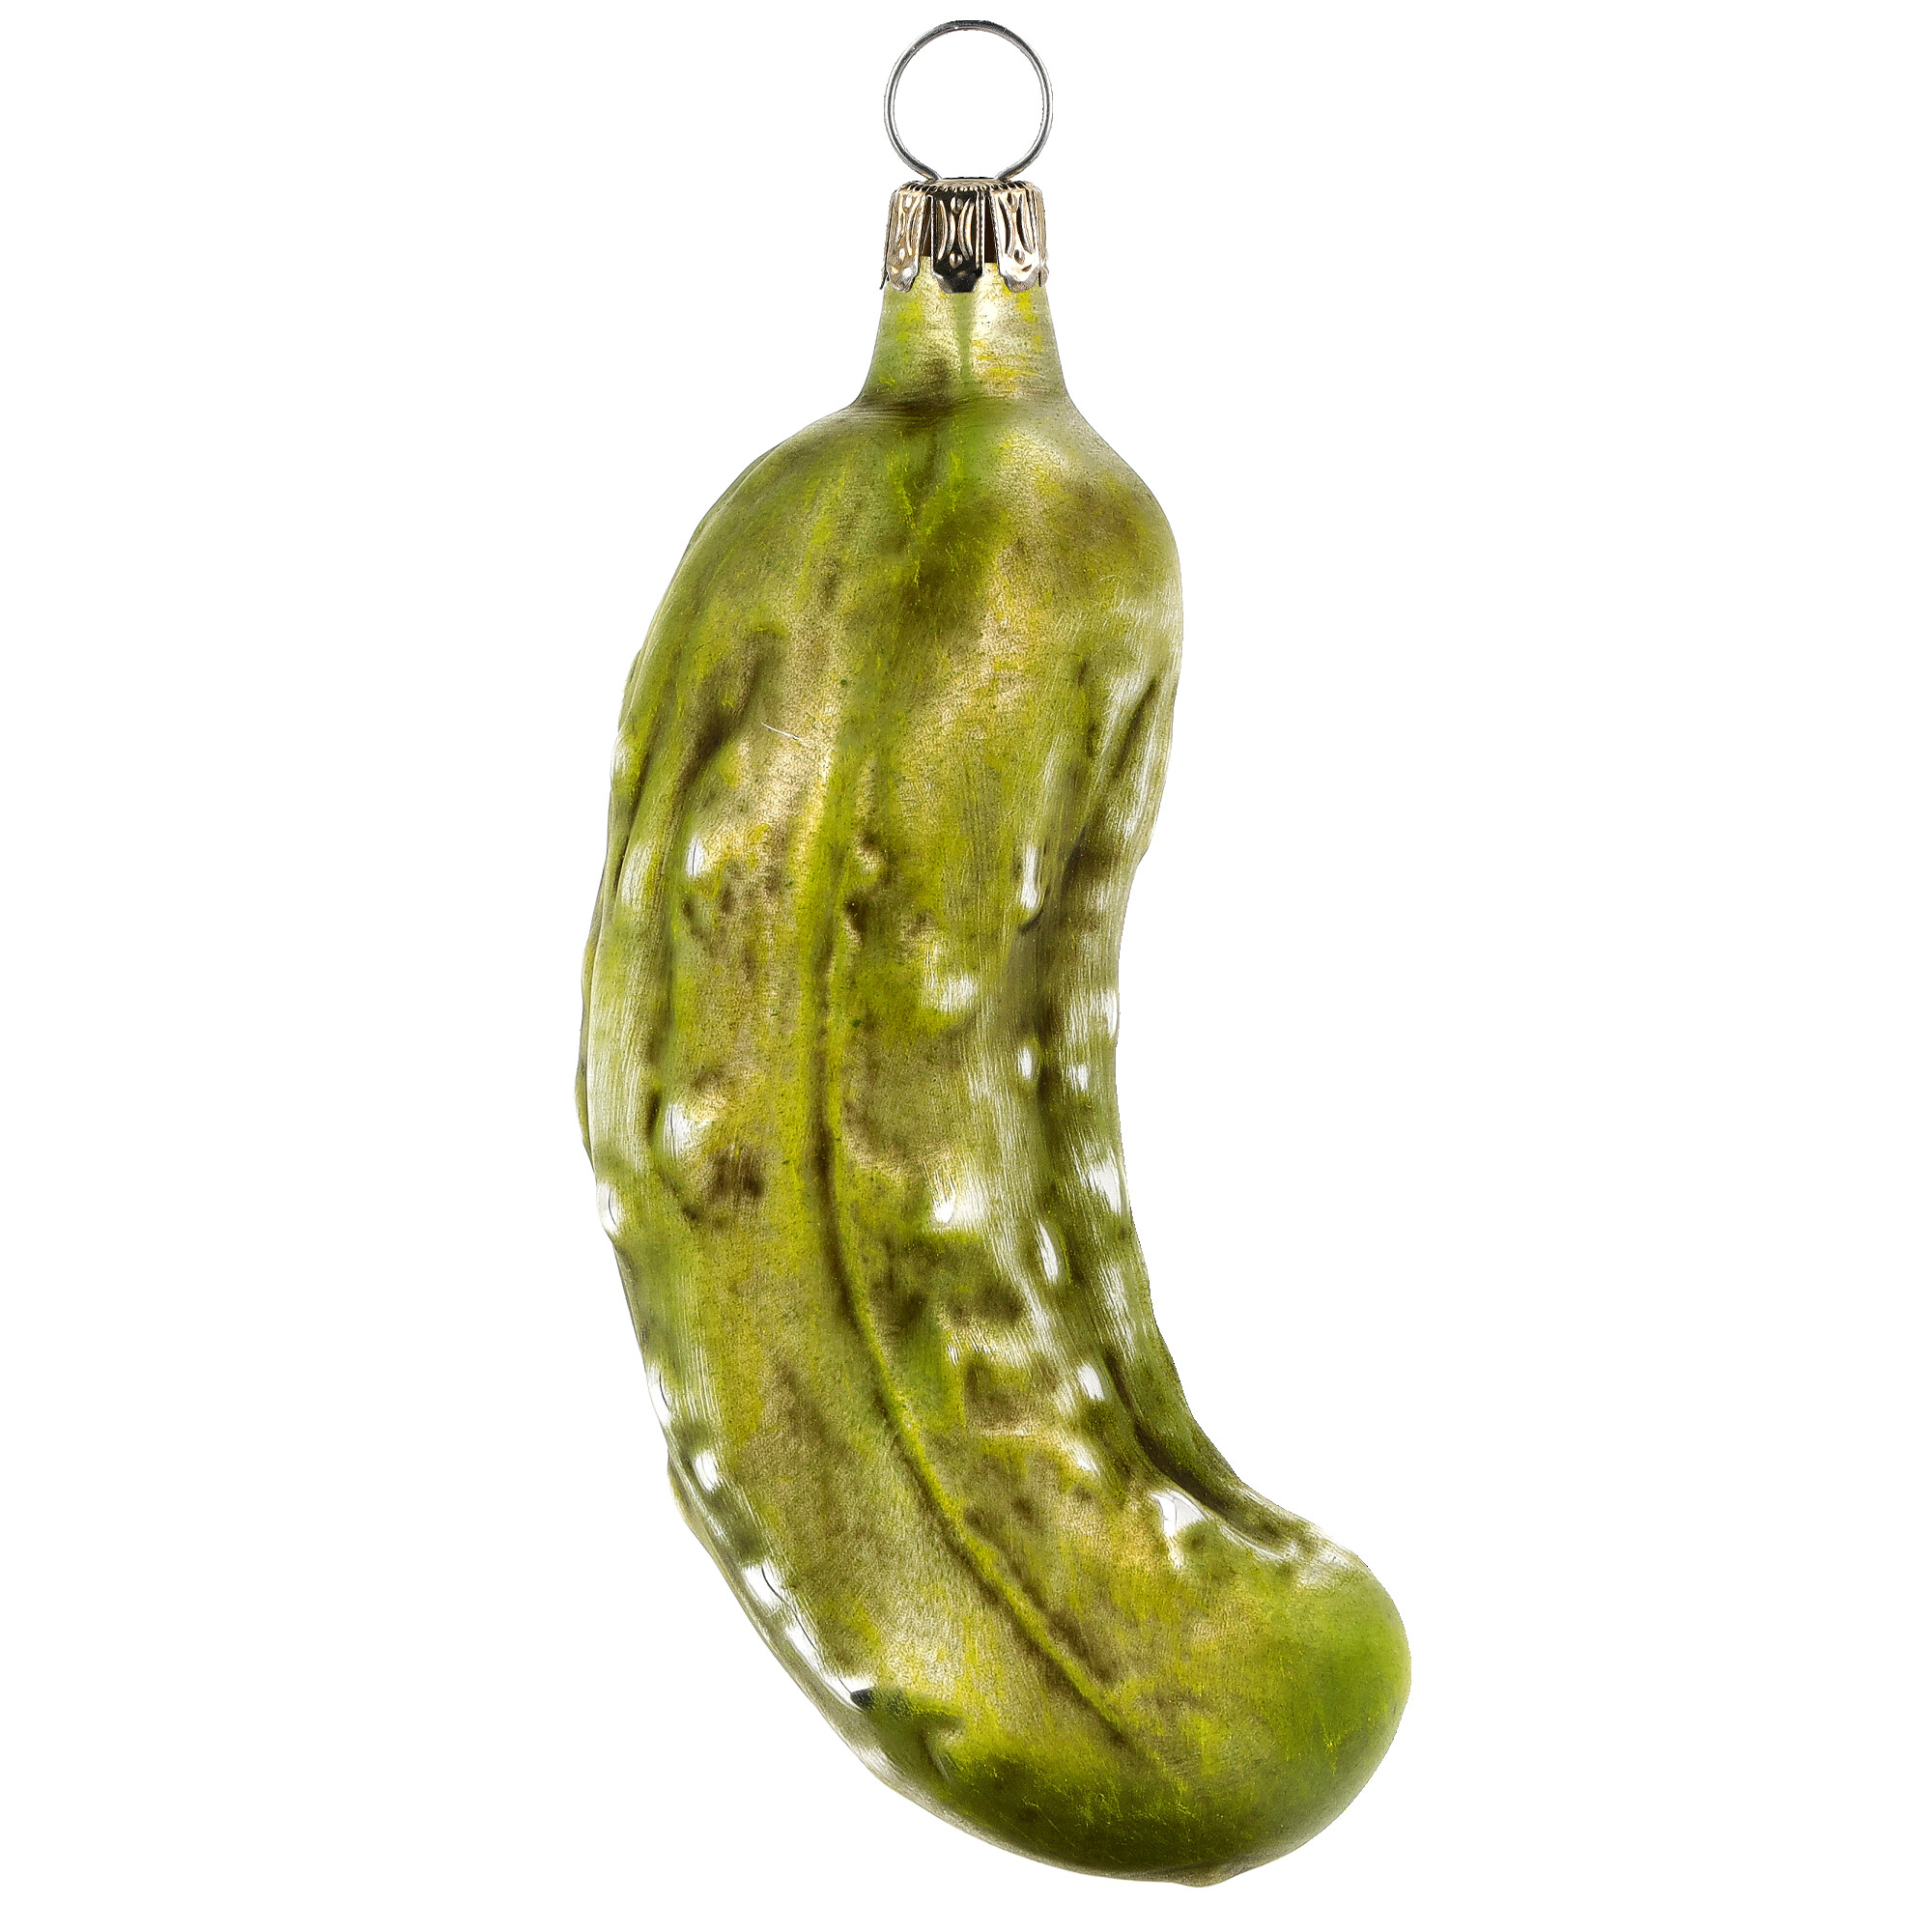 Retro Vintage style Christmas Glass Ornament - Large pickle dill